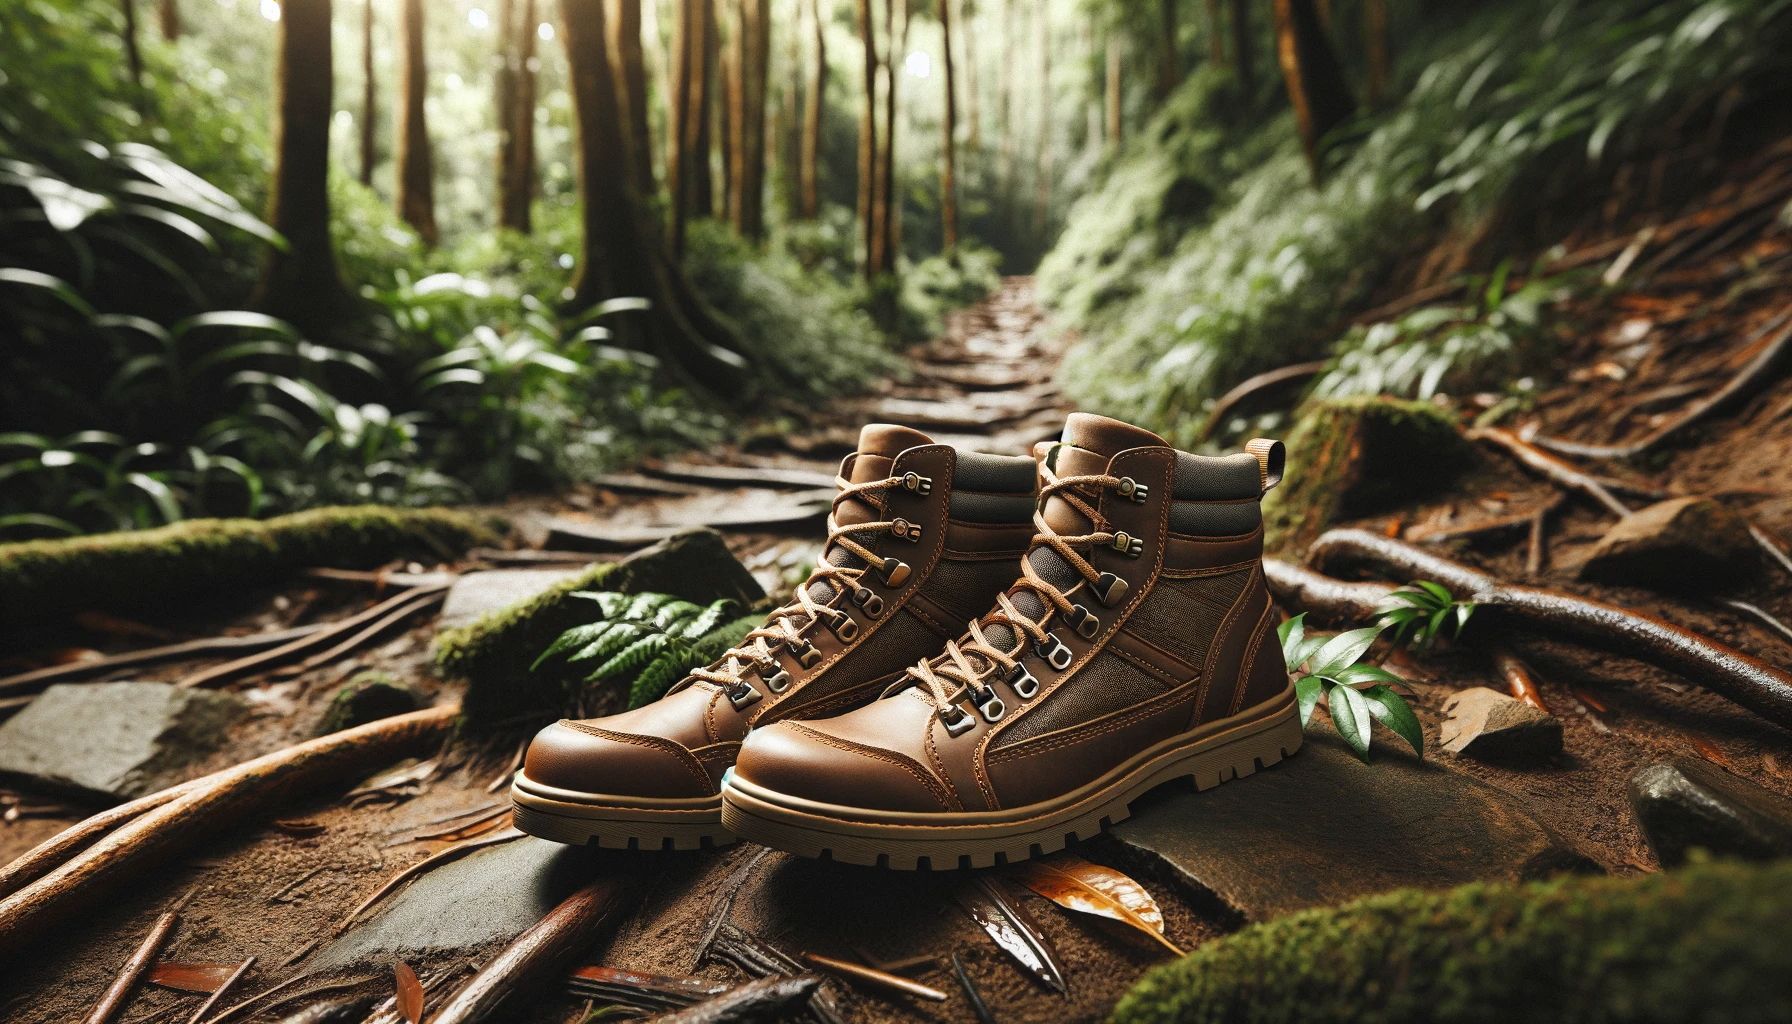 environmental image e-commerce fashion, depicting a pair hiking boots in a natural forest 